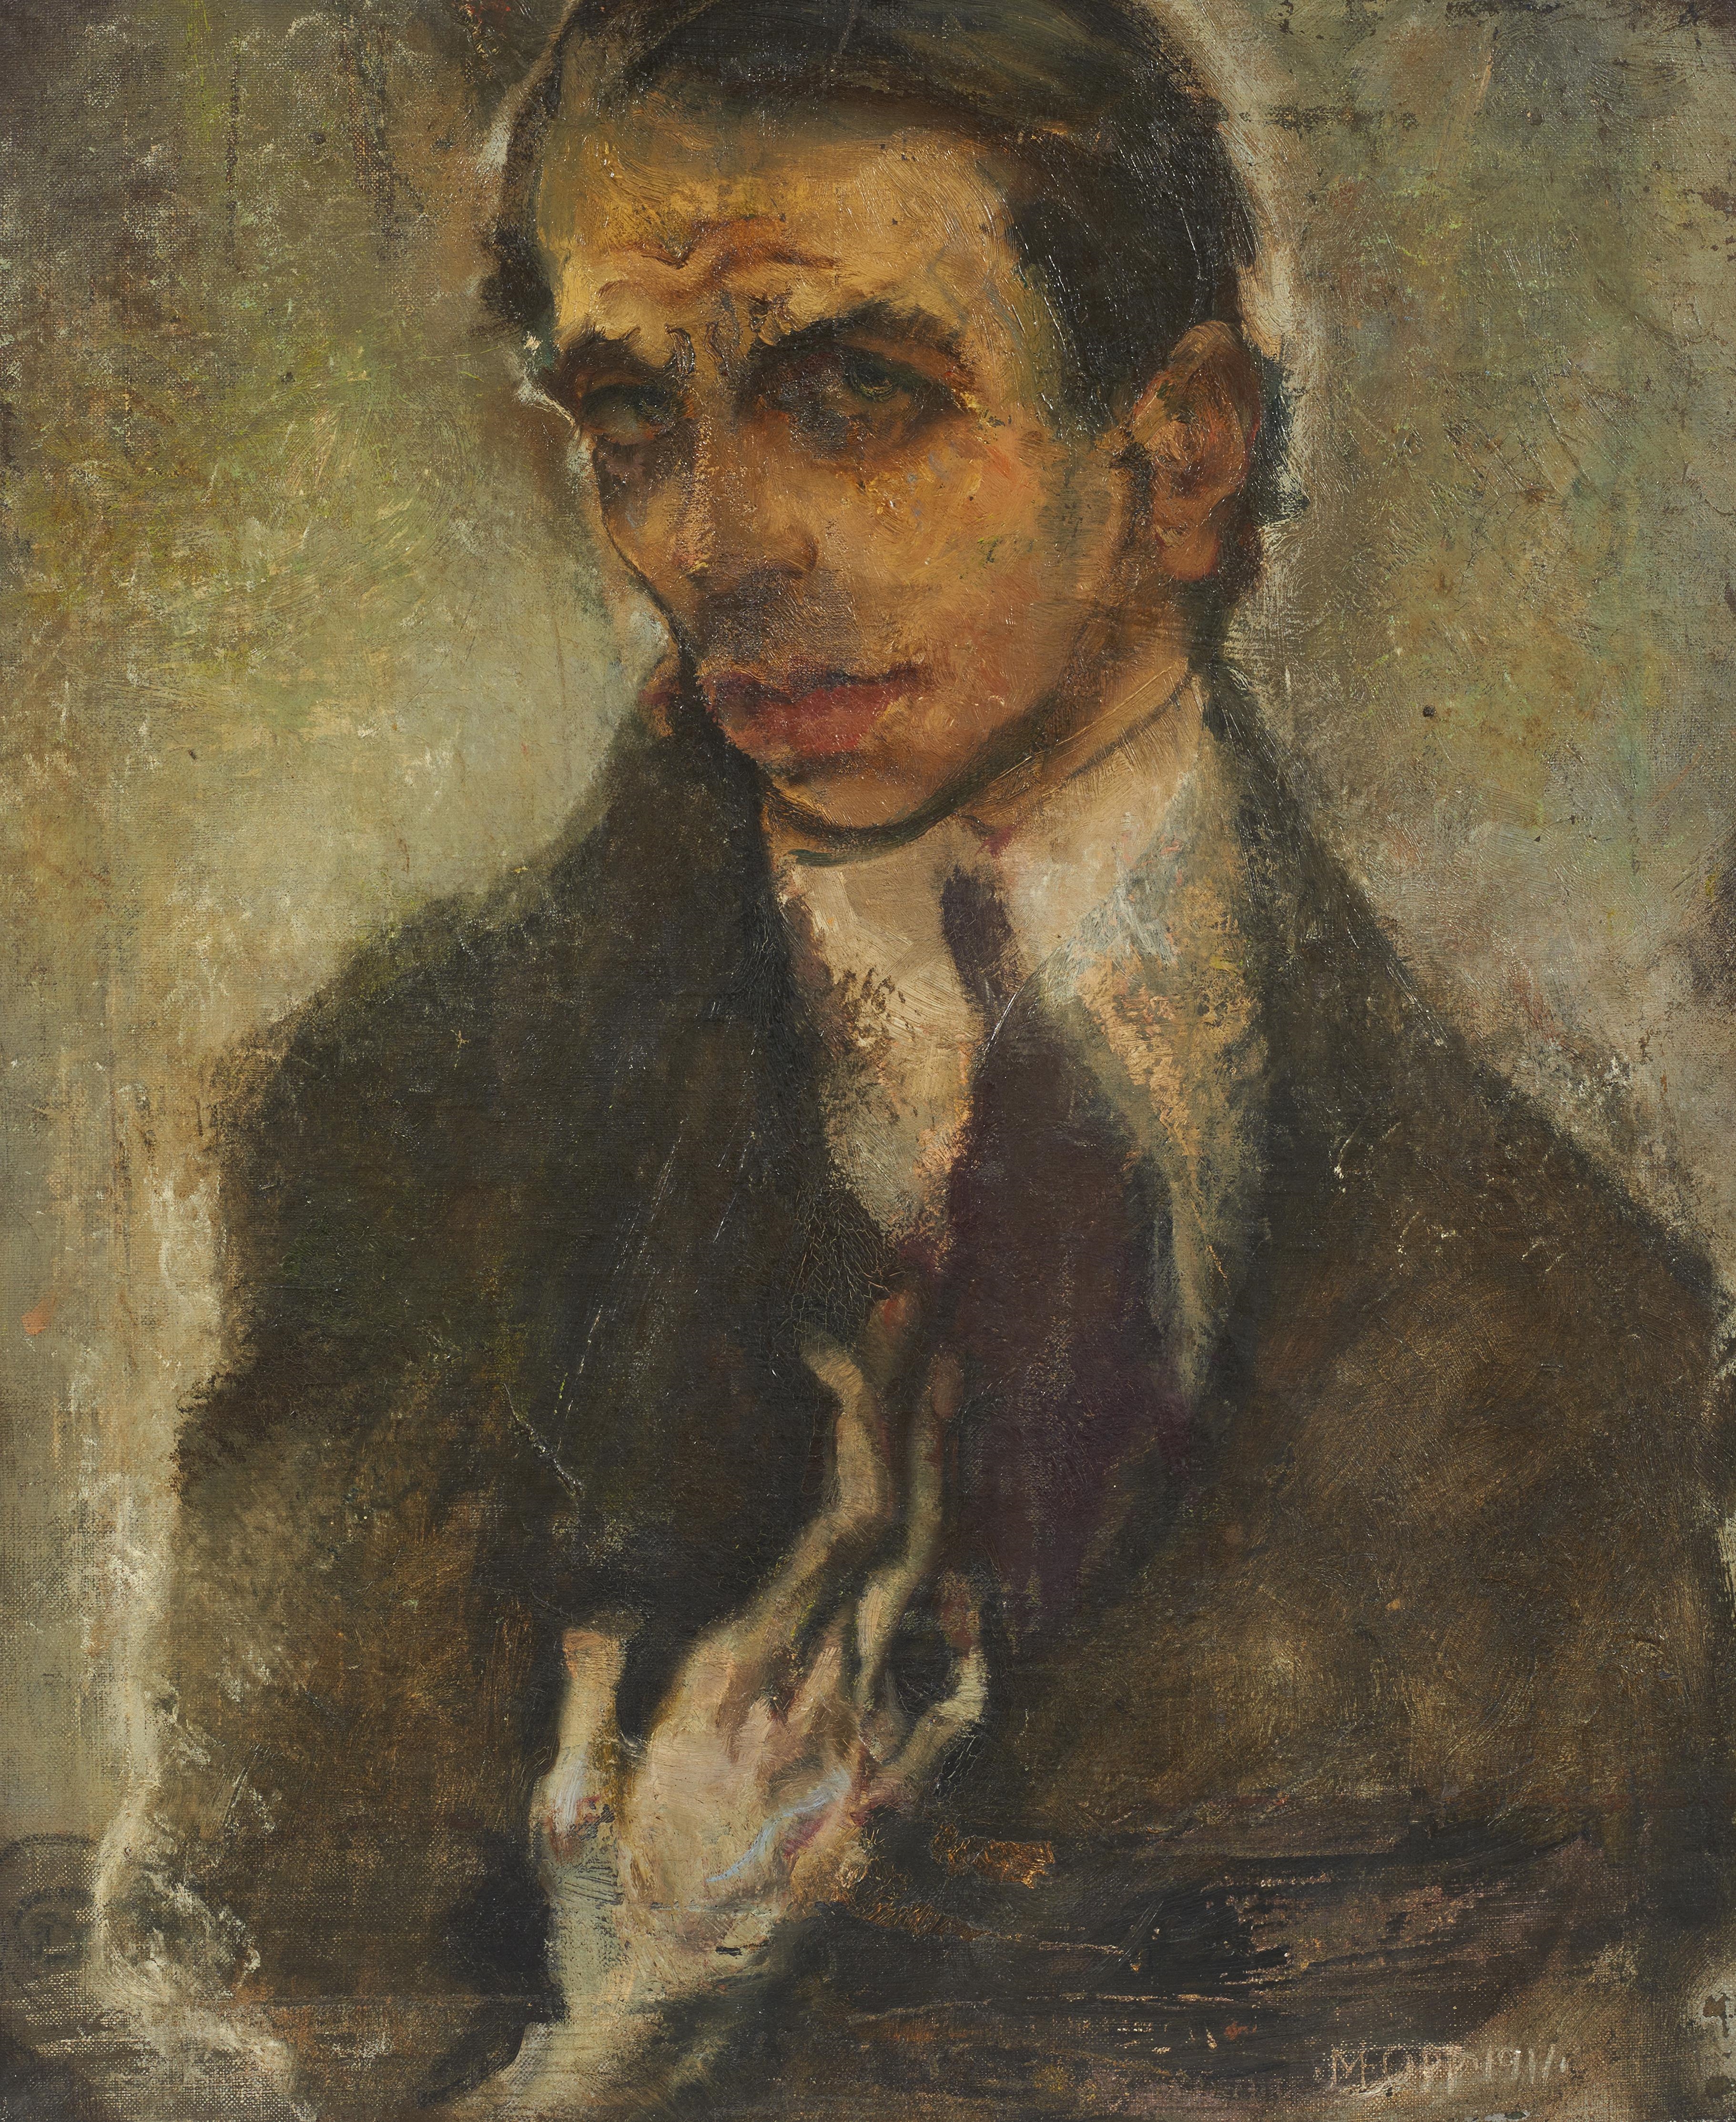 Selbstbildnis (Self-Portrait) by Max Oppenheimer, dated 1911